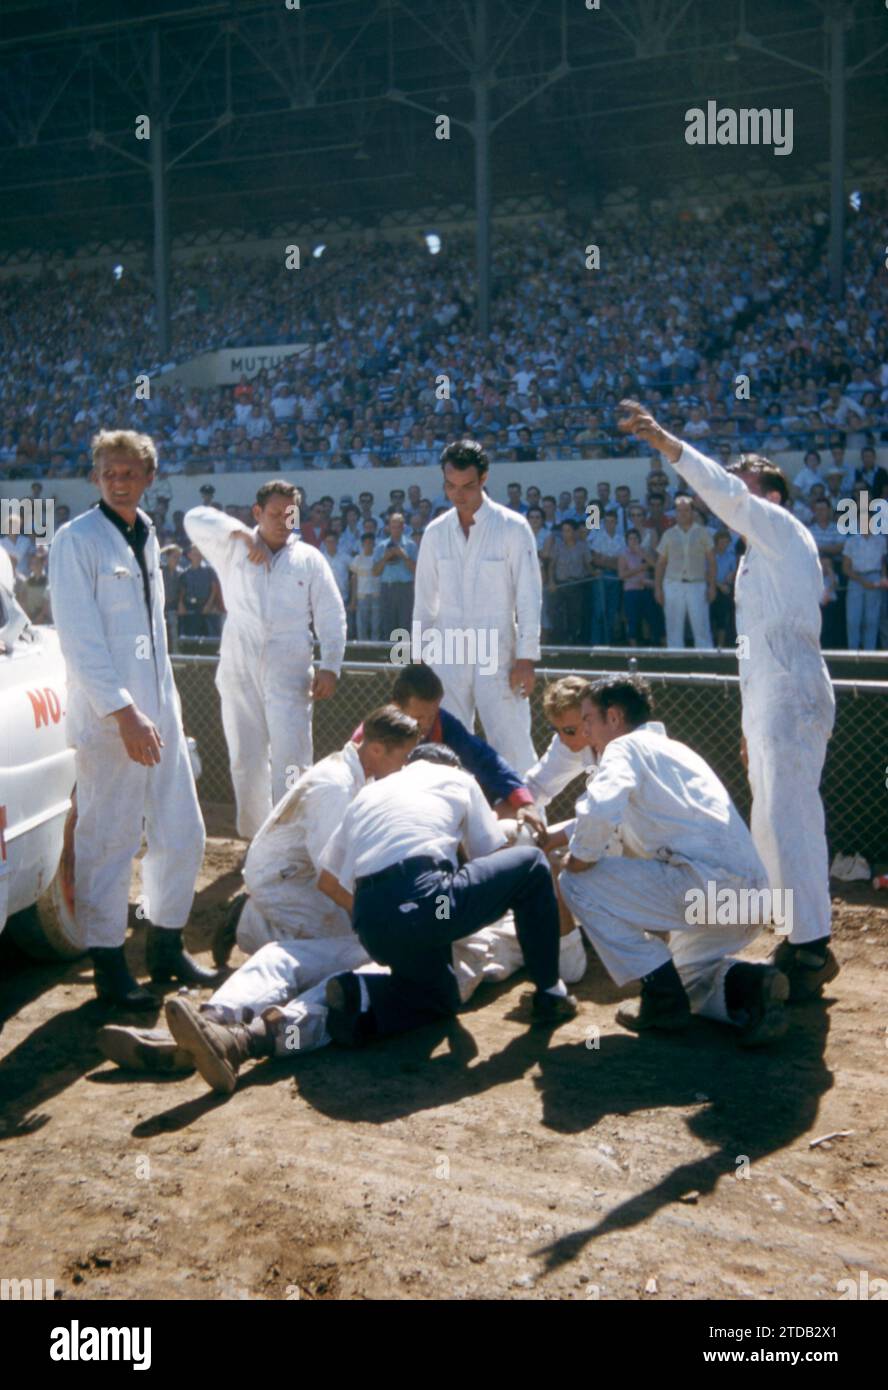 SACRAMENTO, CA - AUGUST, 1958: A group of men tend to the driver after his car flipped and crashed during a car show at the Sacramento State Fair circa August, 1958 in Sacramento, California. (Photo by Hy Peskin) Stock Photo